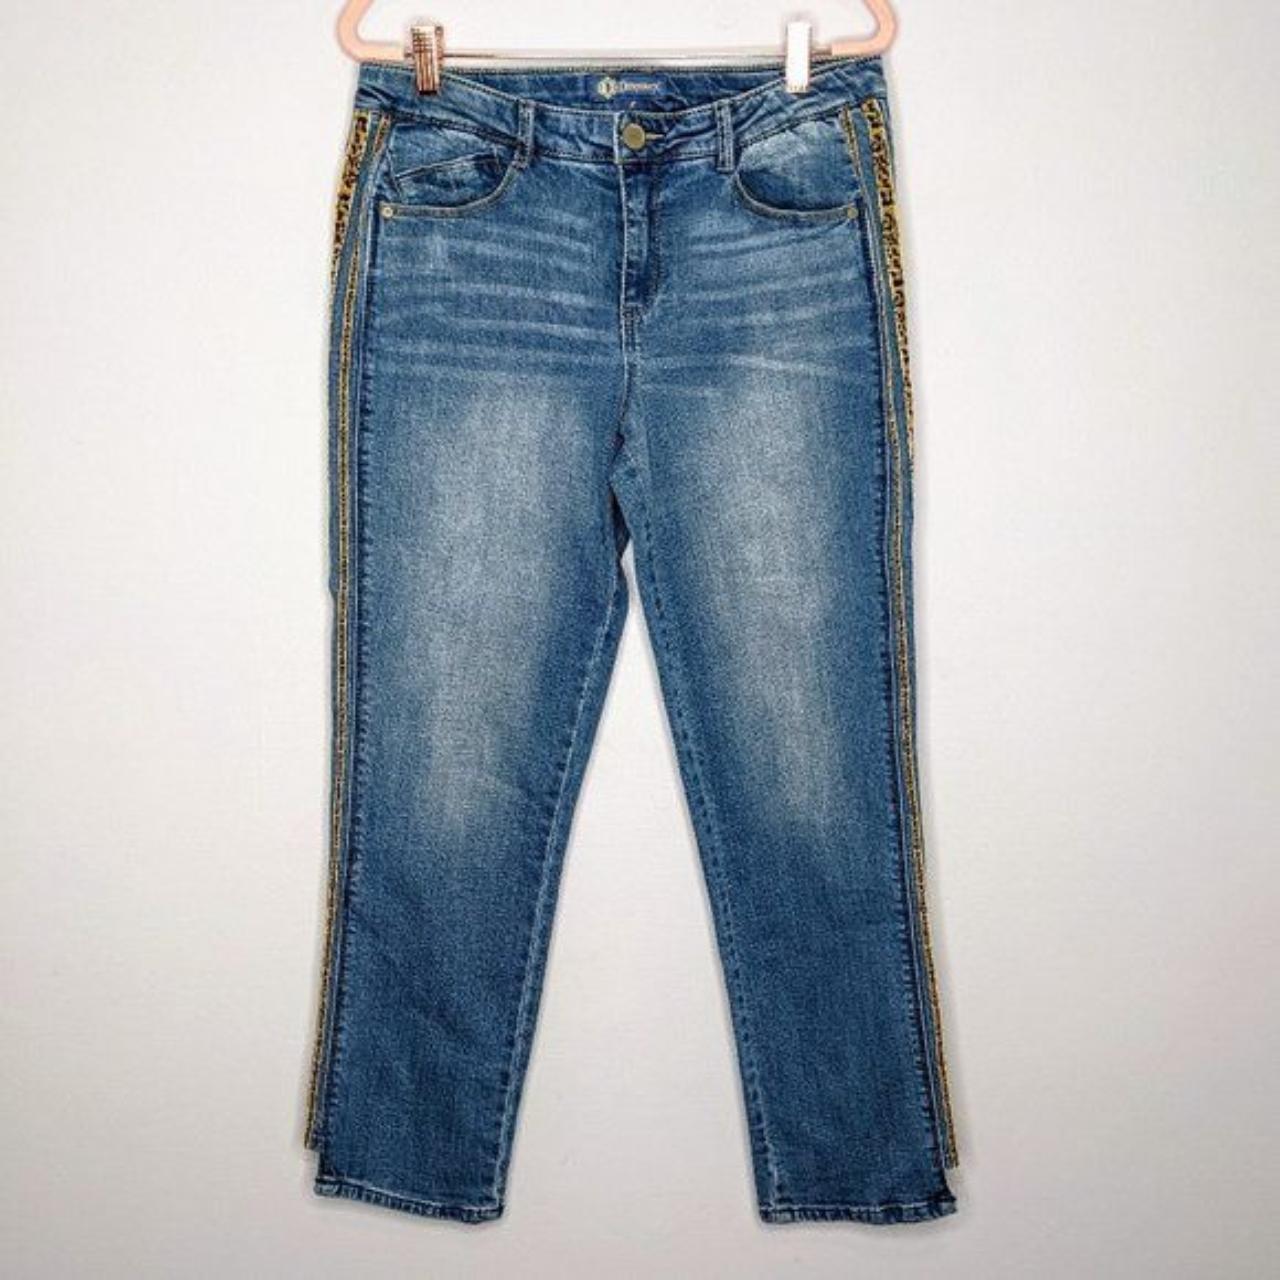 Product Image 1 - Check out these stretch denim